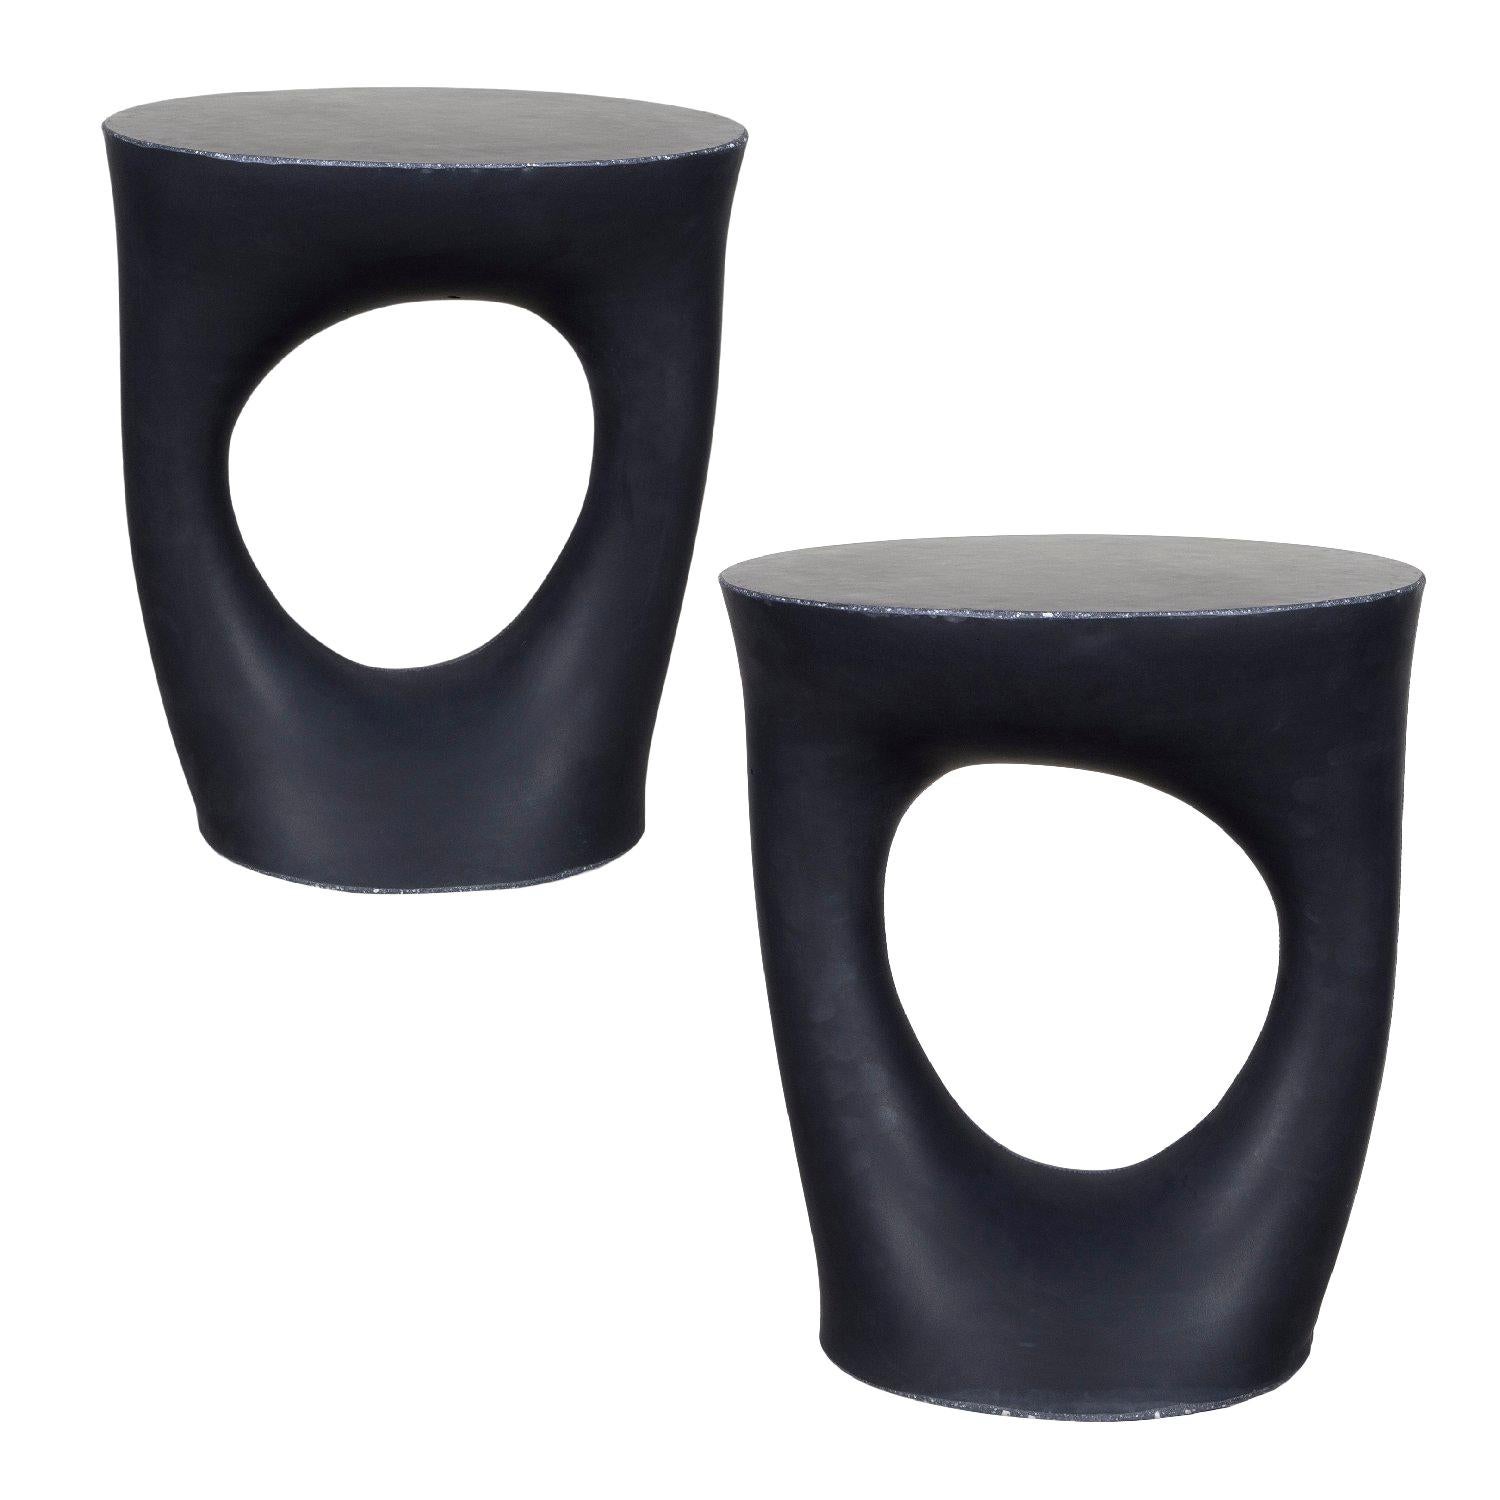 Pair of Black Kreten Side Tables from Souda, Short, Made to Order